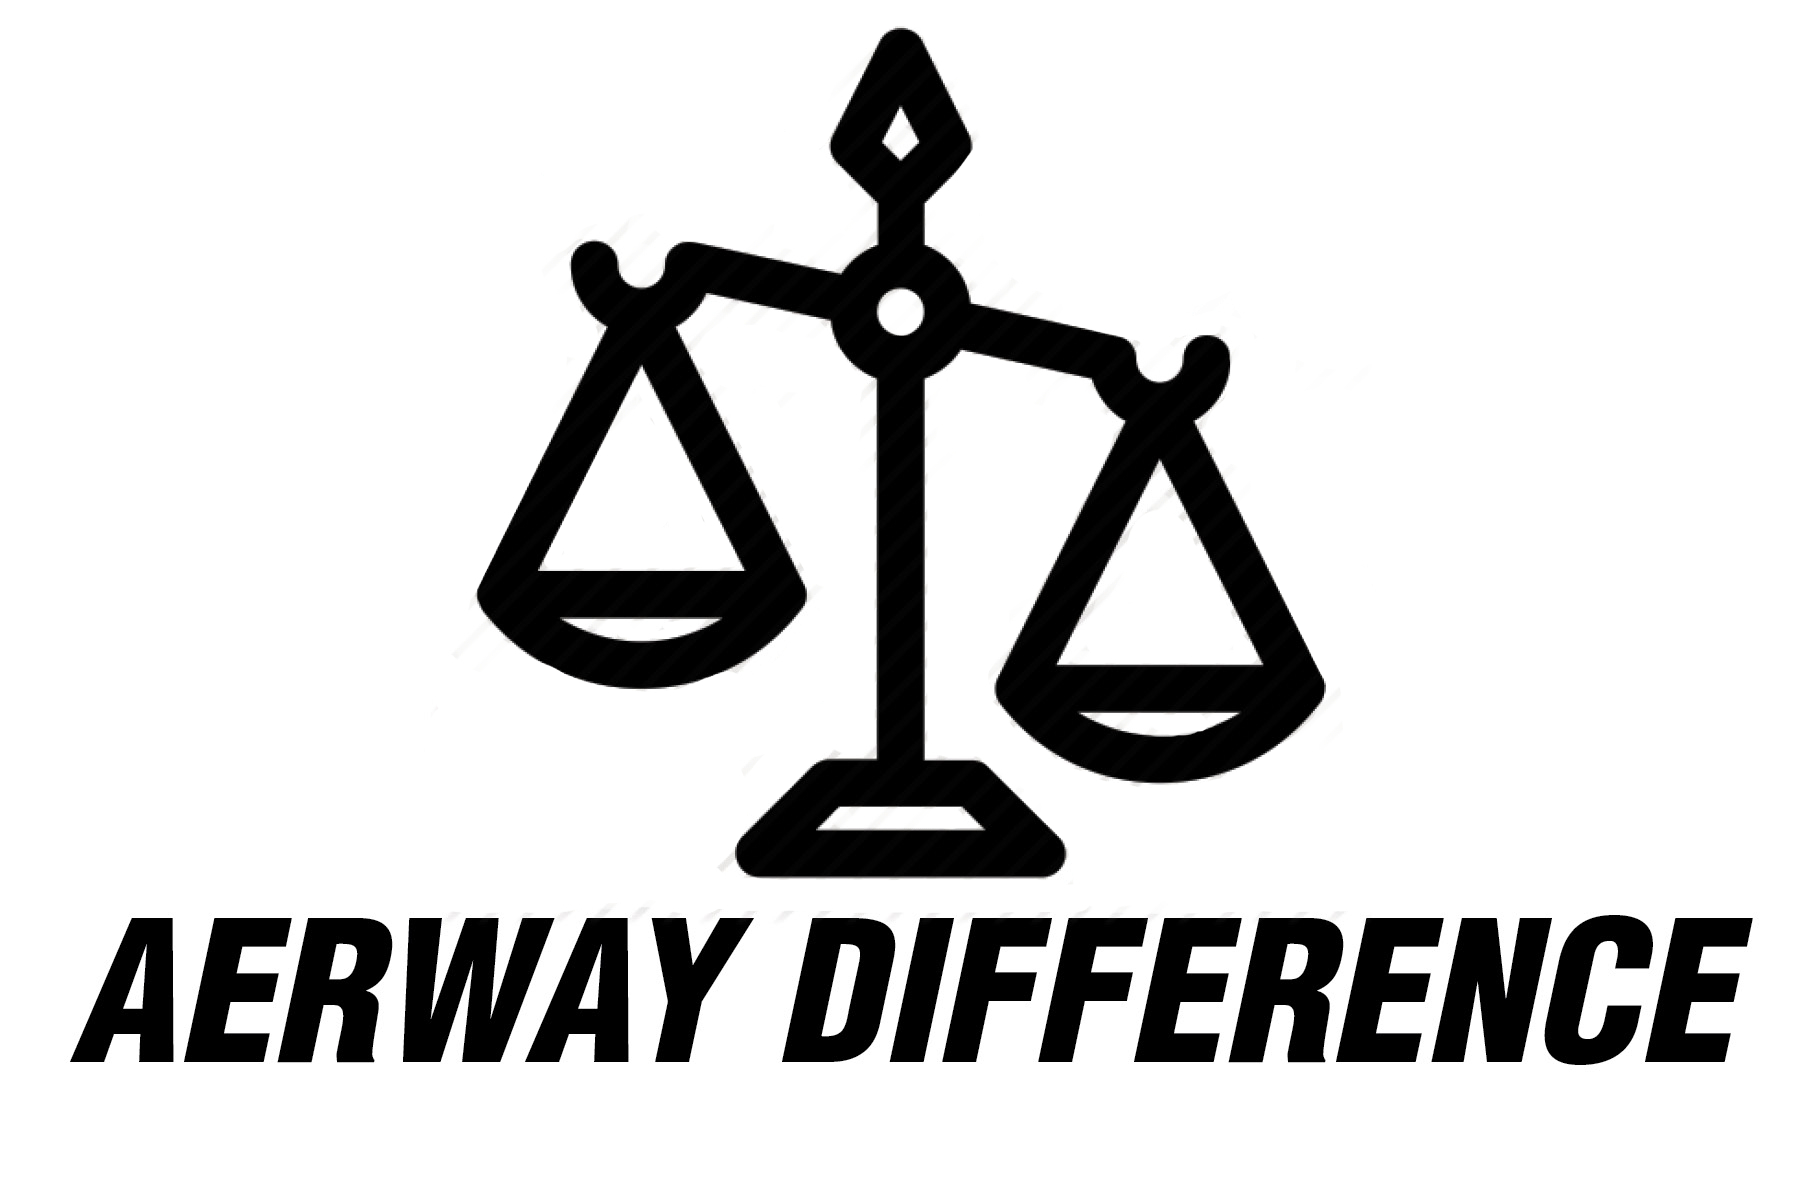 AERWAY DIFFERENCE.jpg